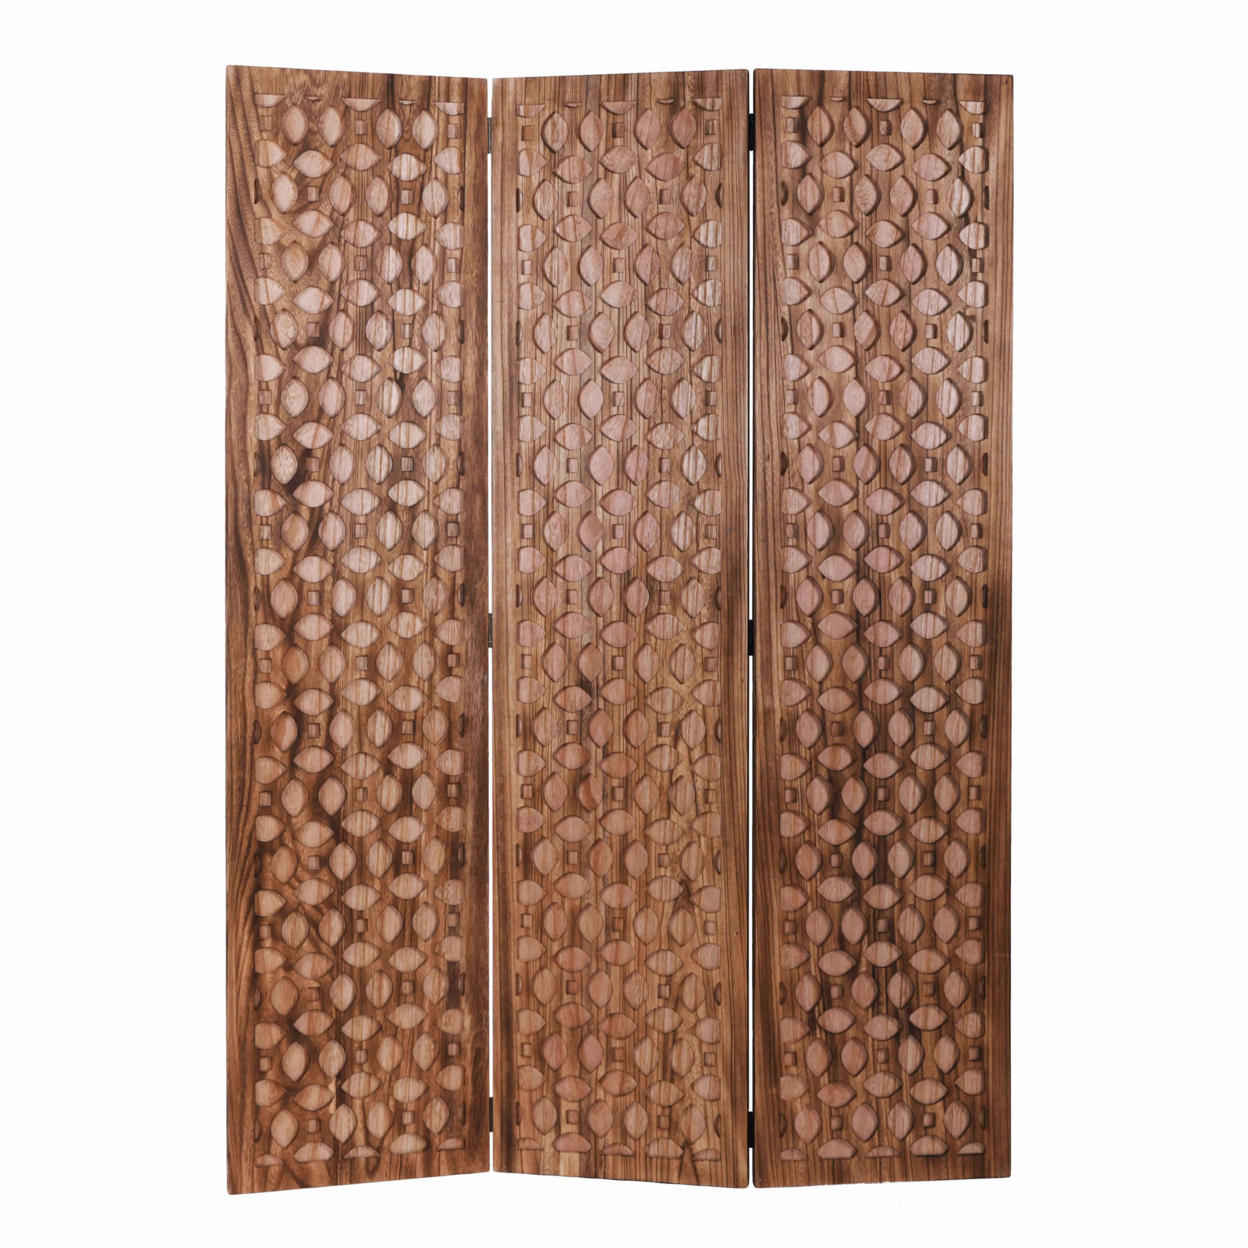 3 Panel Transitional Wooden Screen With Leaf Like Carvings, Brown- Saltoro Sherpi